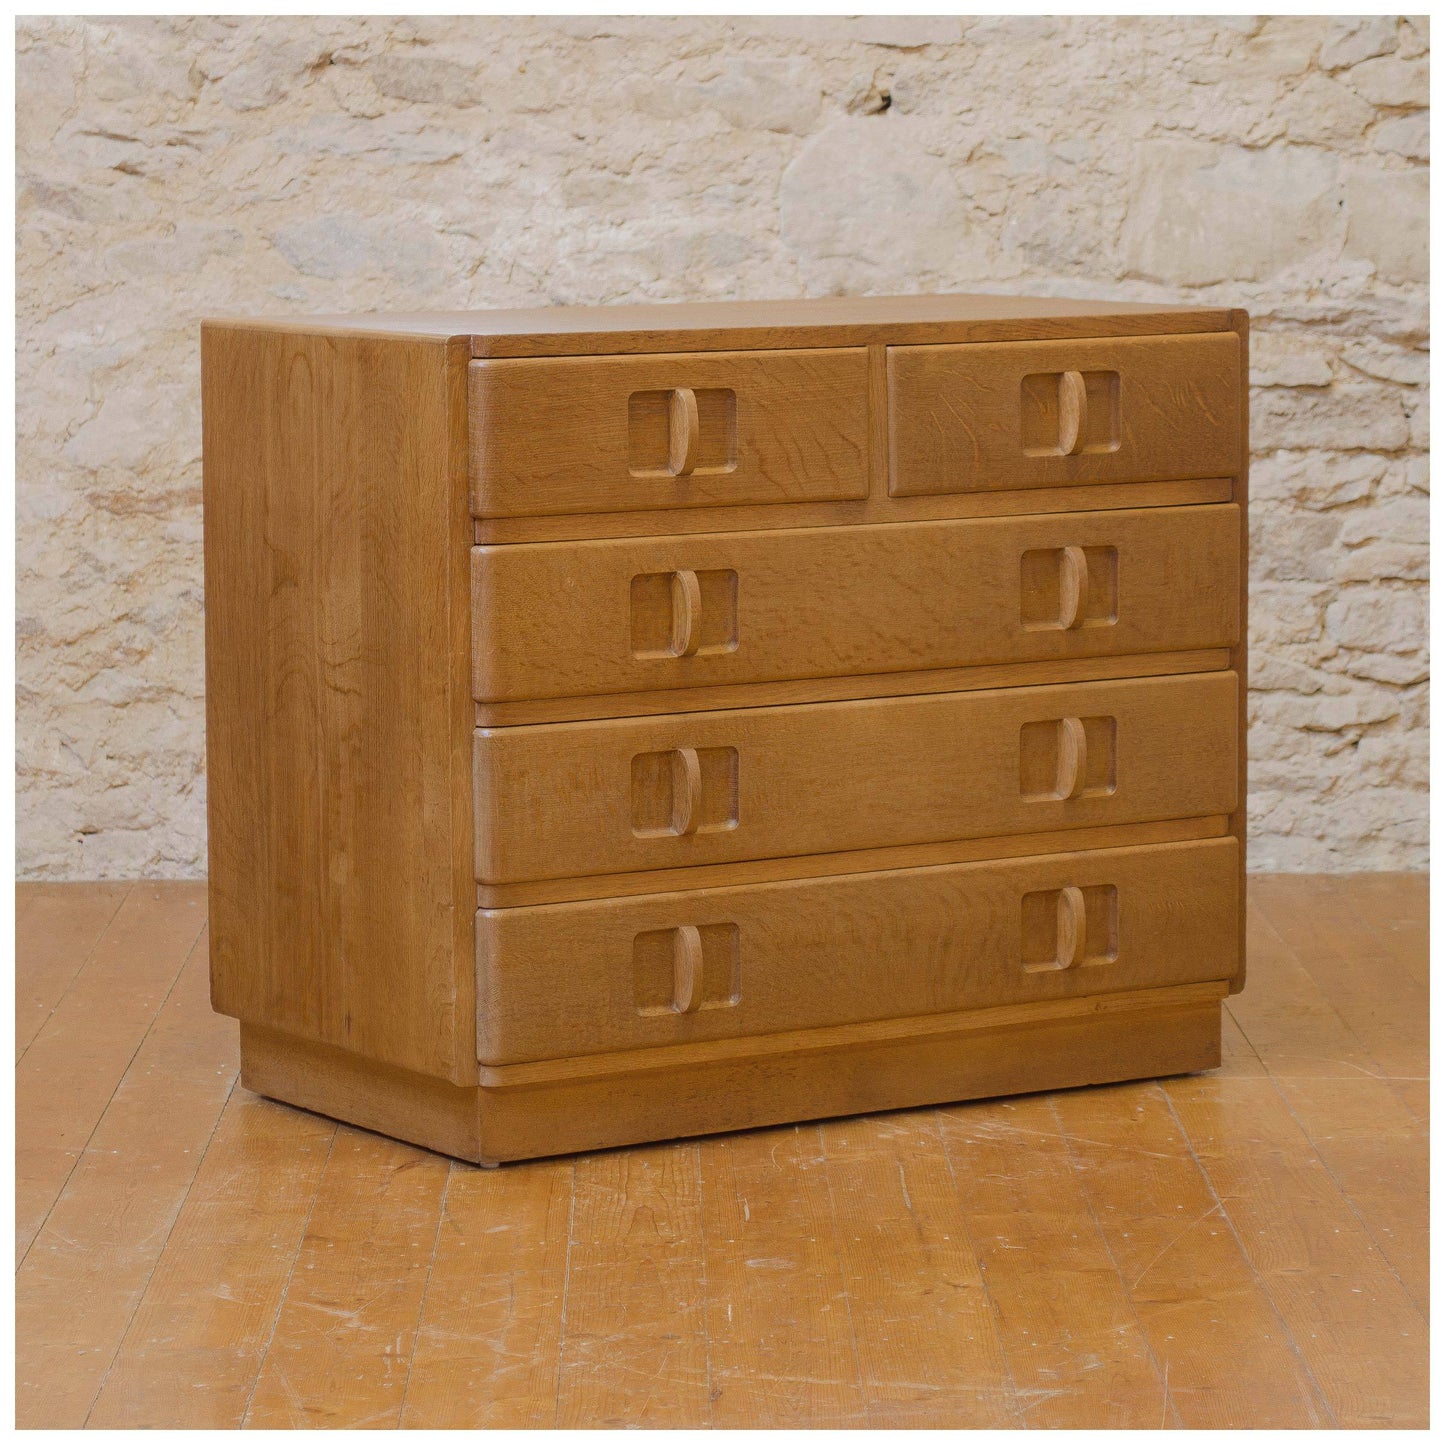 Gordon Russell Arts & Crafts Cotswold School 'Ilmington' Oak Chest of Drawers